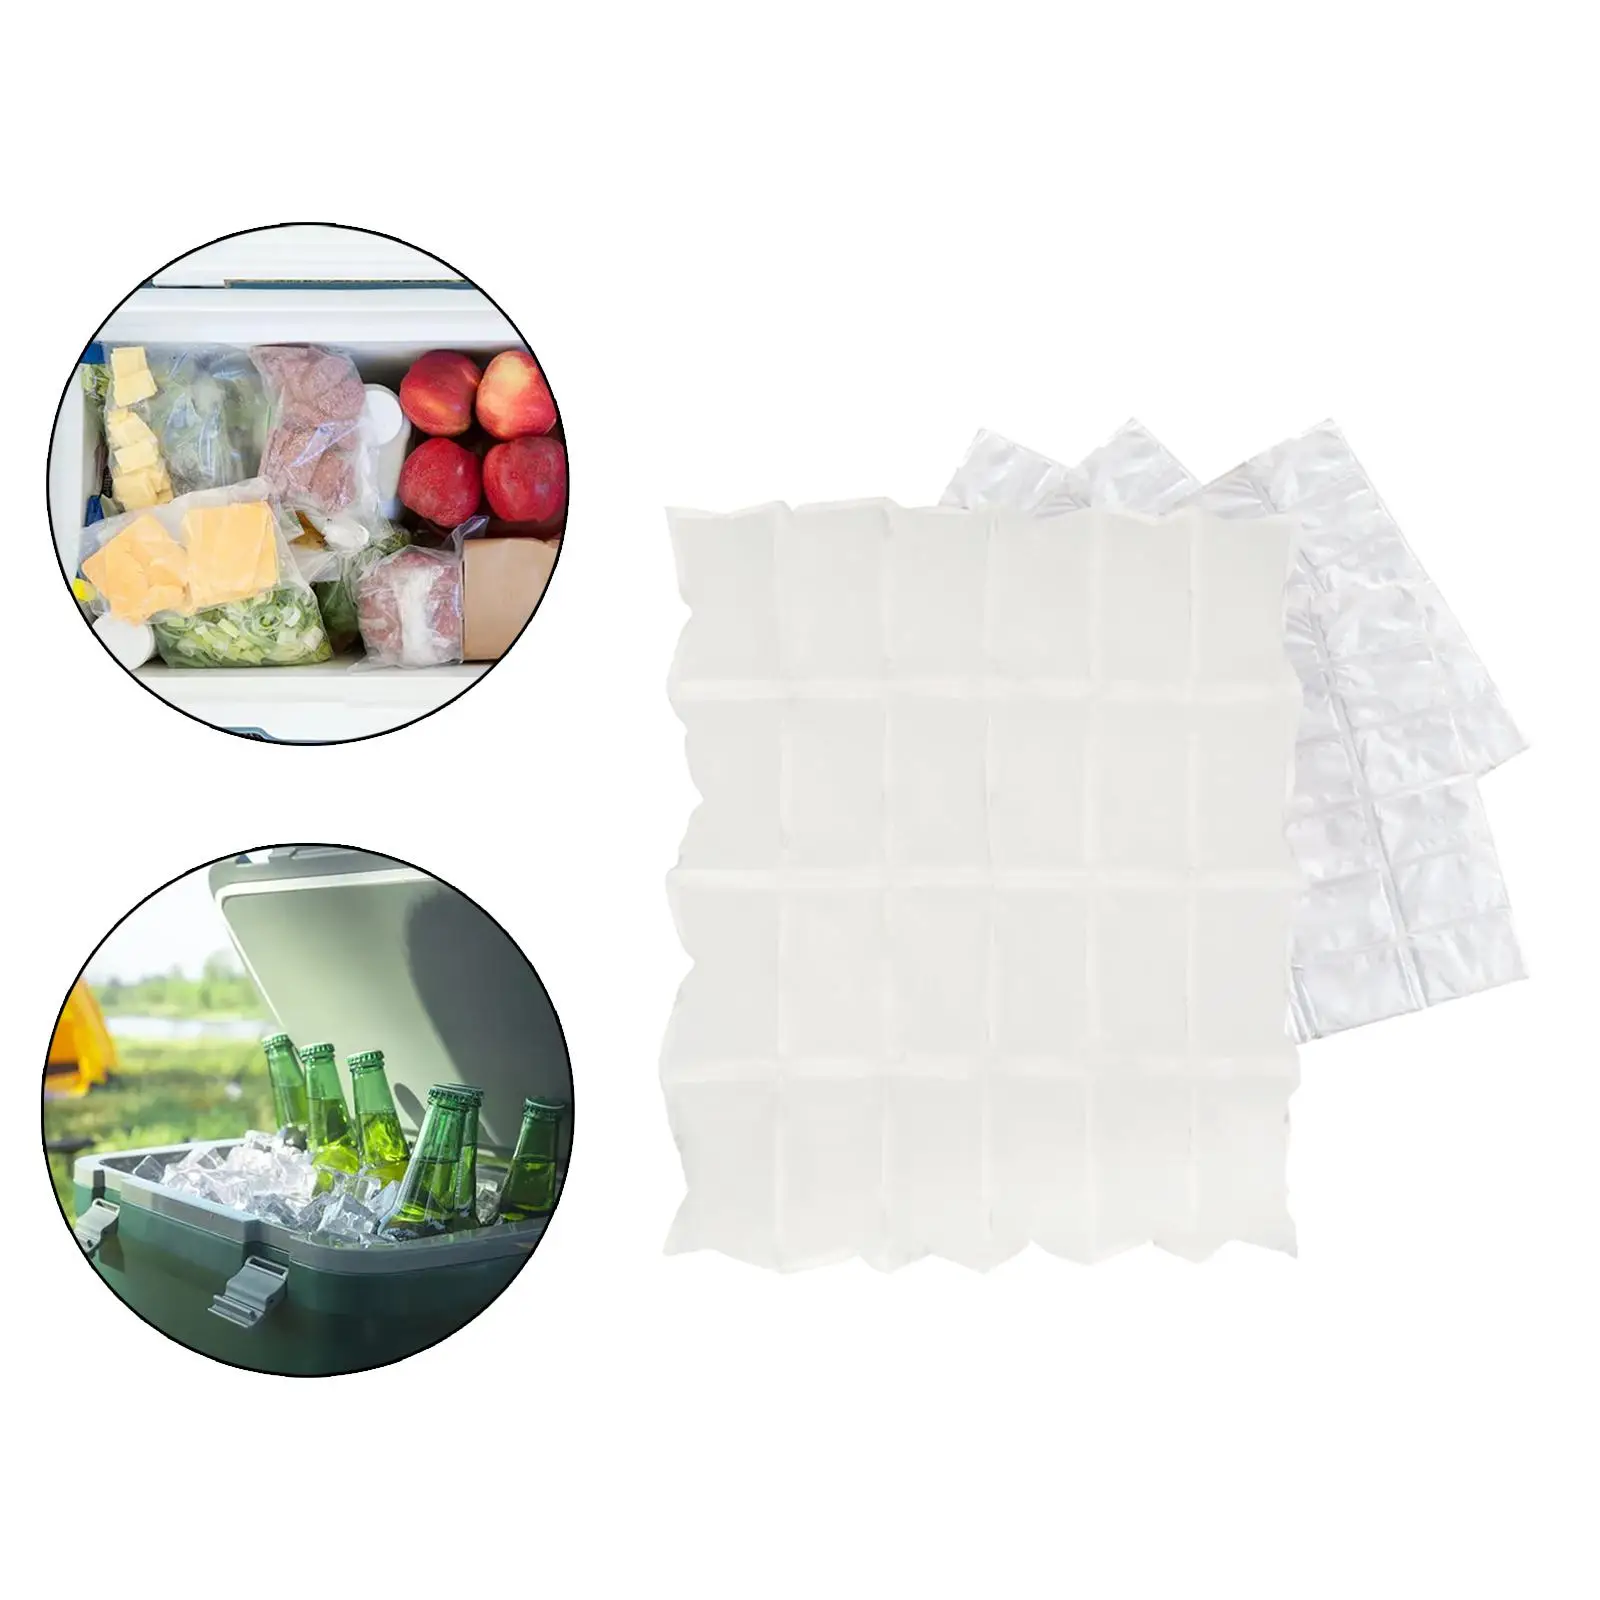 120 Pieces Ice Packs Easy to Use Cuttable Cold Packs Freezer Packs for Refrigerate Food Keep Food Fresh Coolers Lunch Boxes